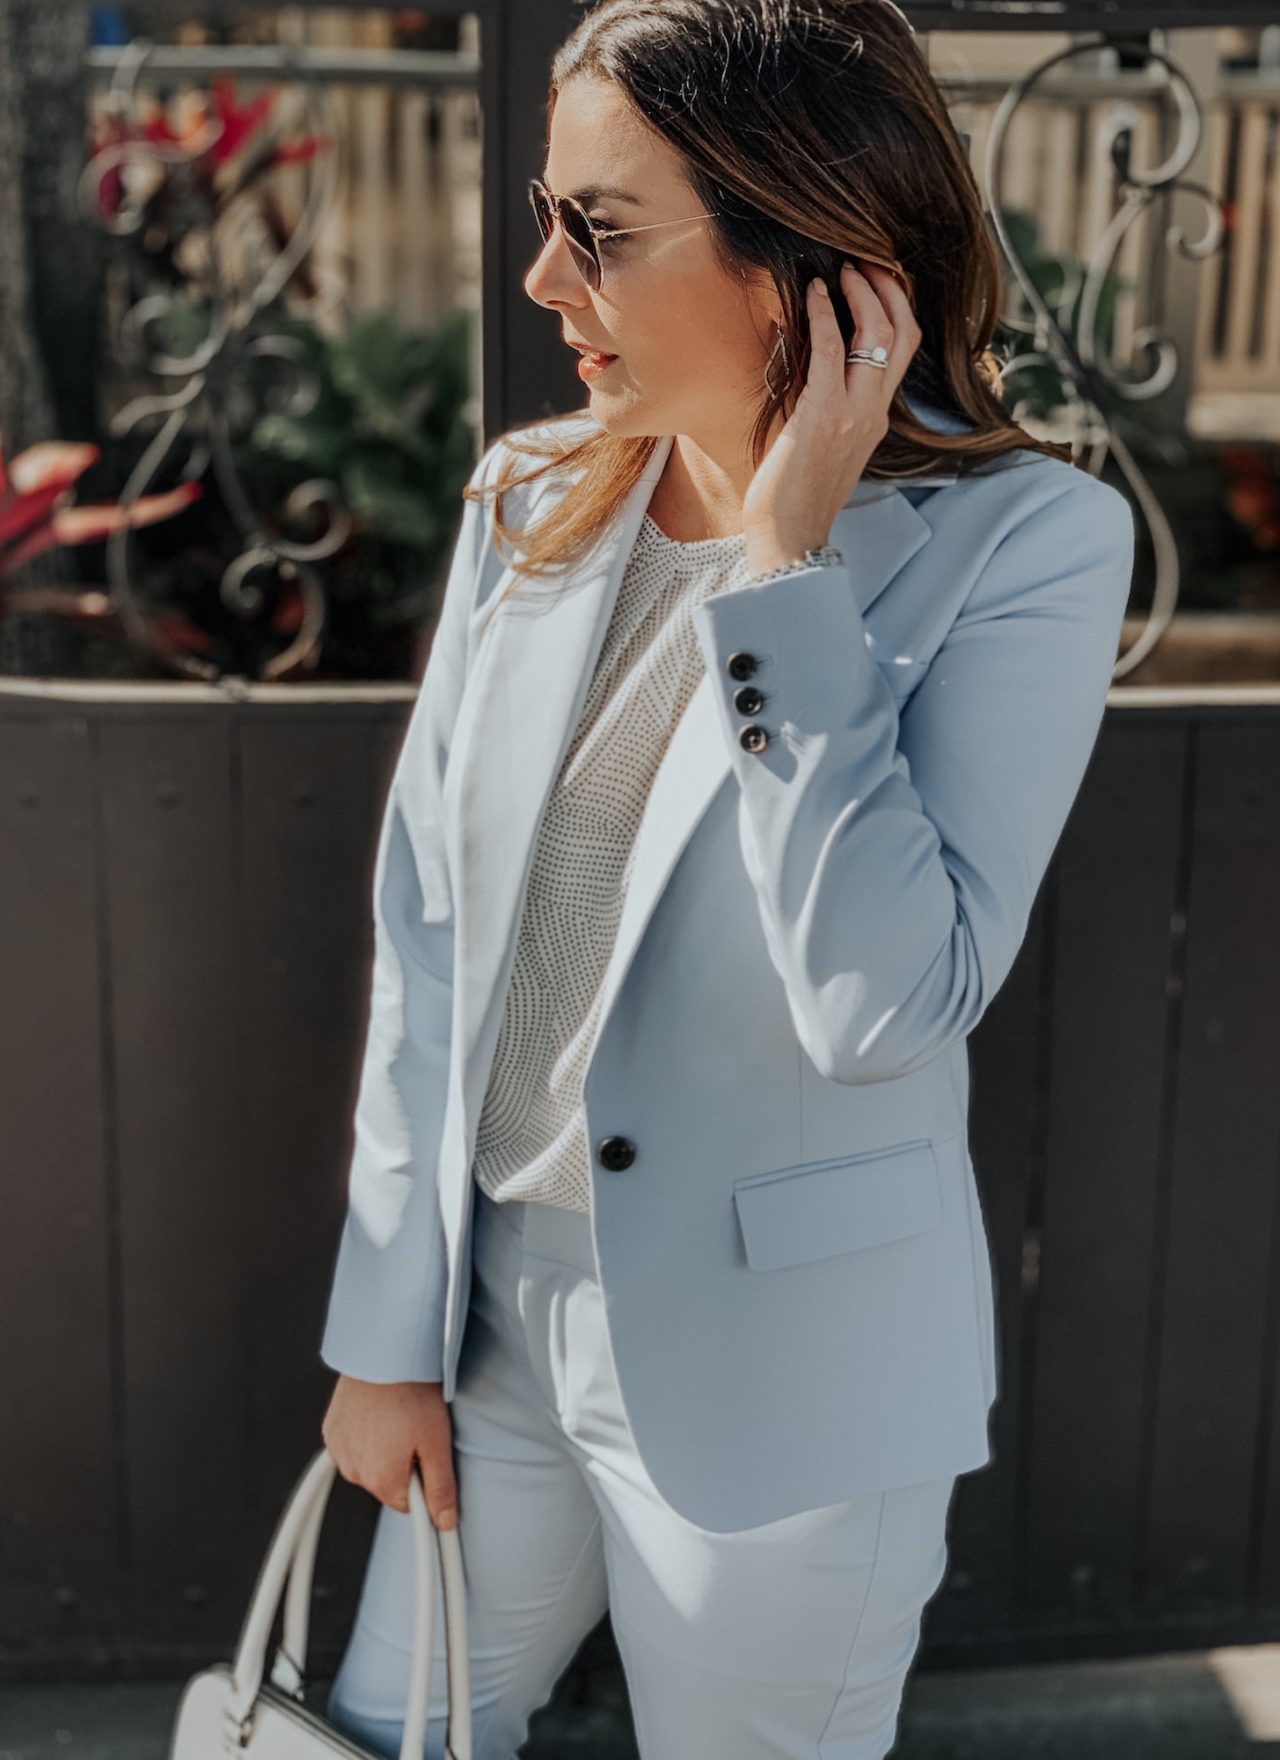 An Affordable Spring Suit from Target